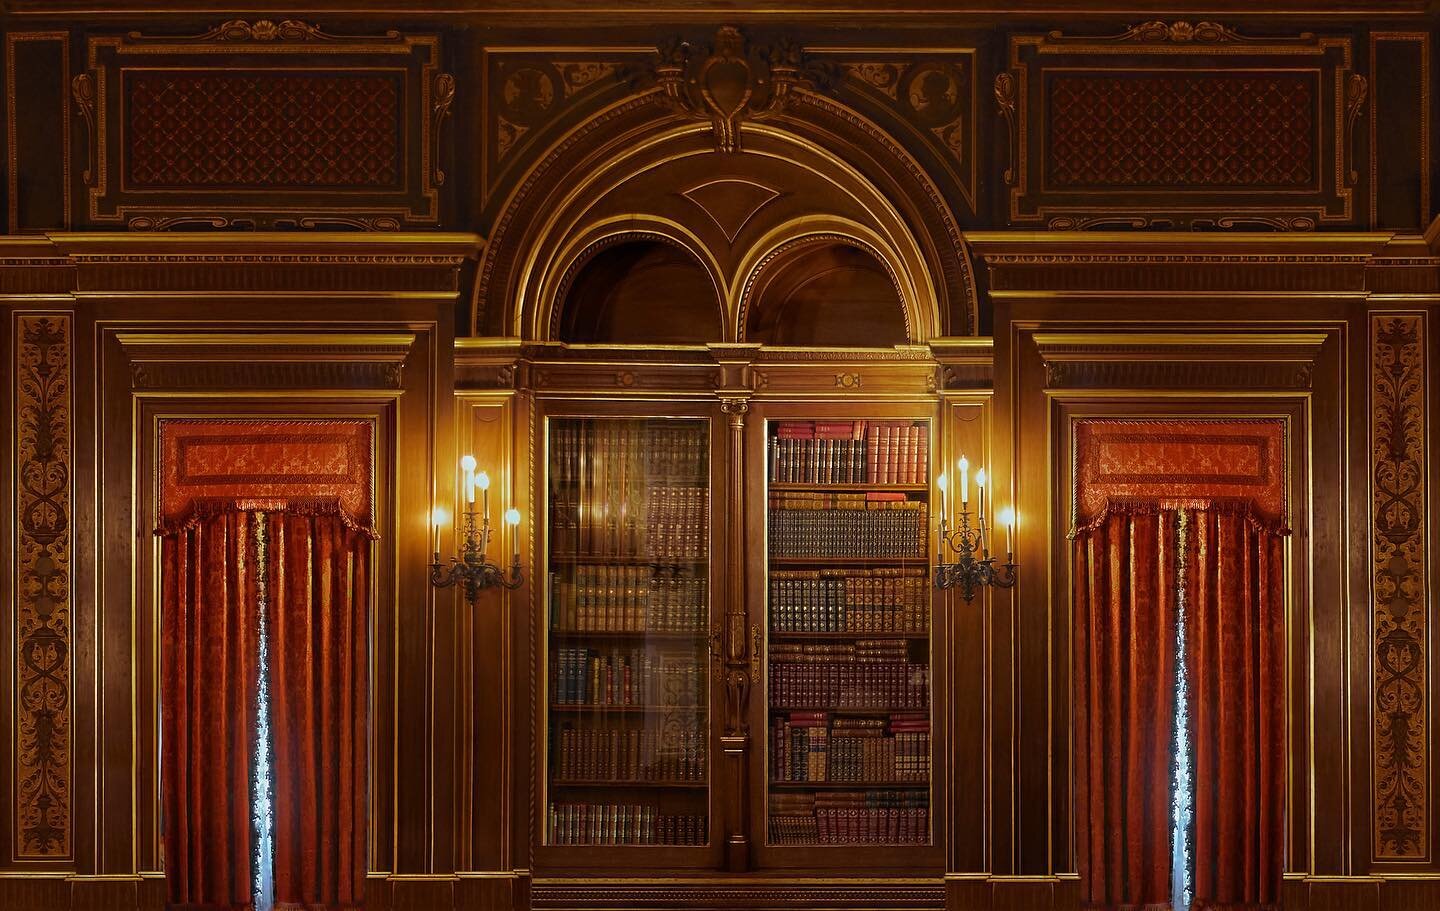 BRB, moving into the library from the Architectural Collection&hellip;
#comingsoon #thebackdropstudio #backdropstudio #architecturalbackdrops #fineartbackdrops #digitalbackdrops #compositephotography #Photoshop #digitalart #library